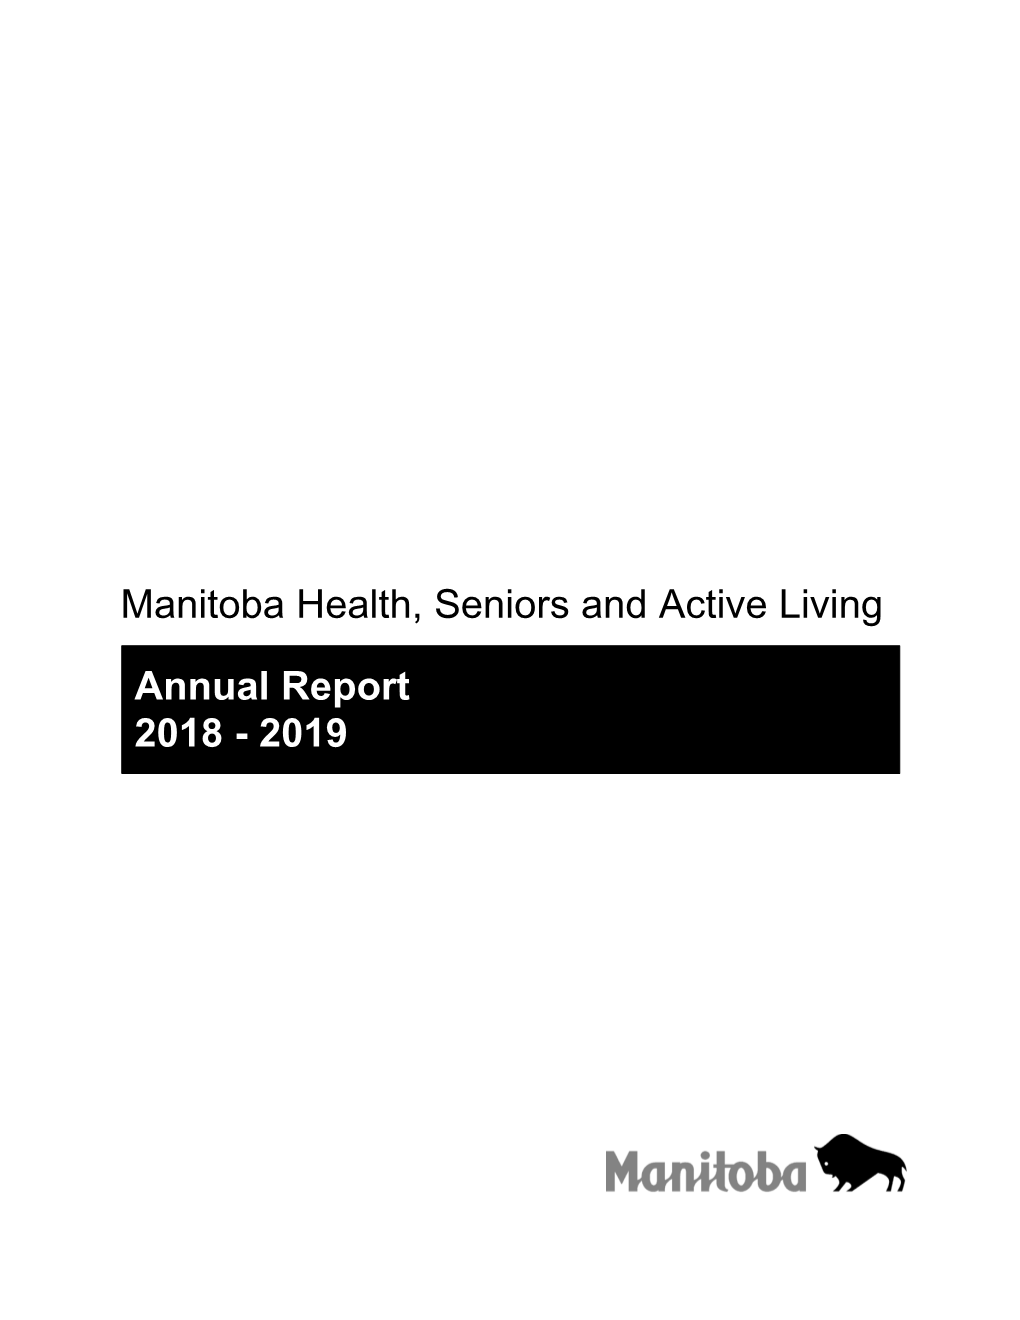 Manitoba Health, Seniors and Active Living Annual Report 2018-2019